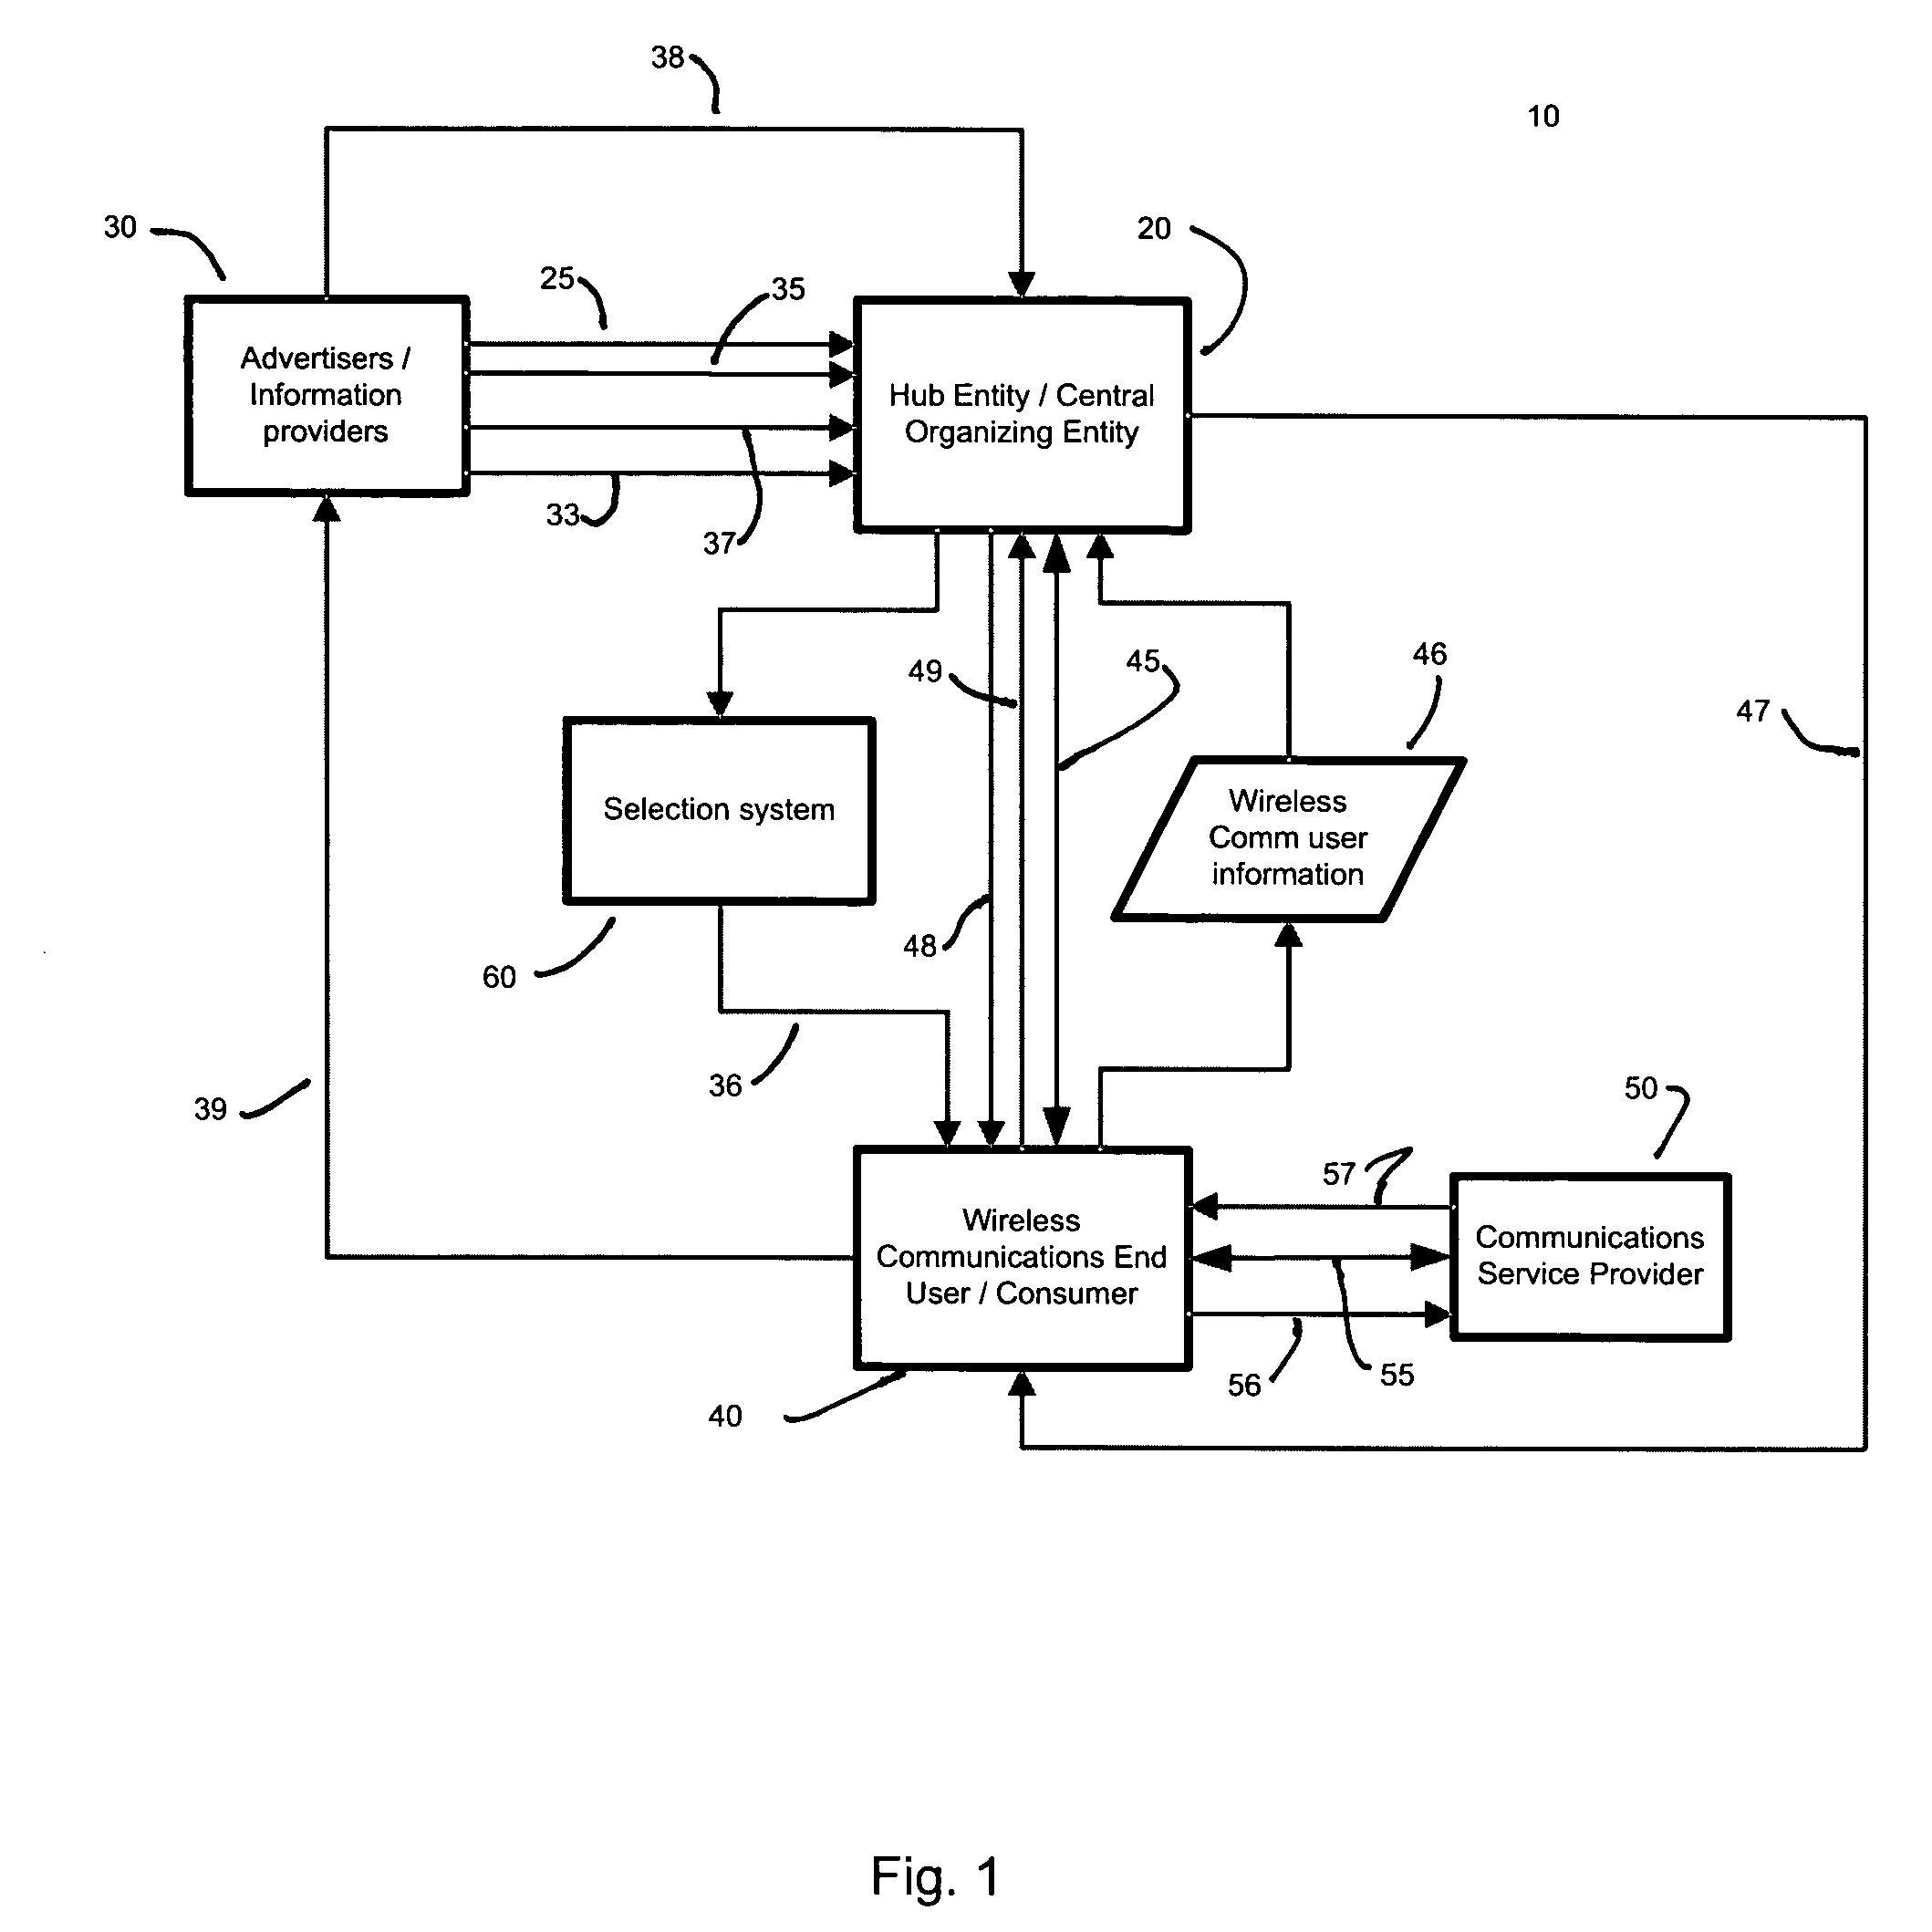 Method for directed advertising and information distribution using a wireless communications network